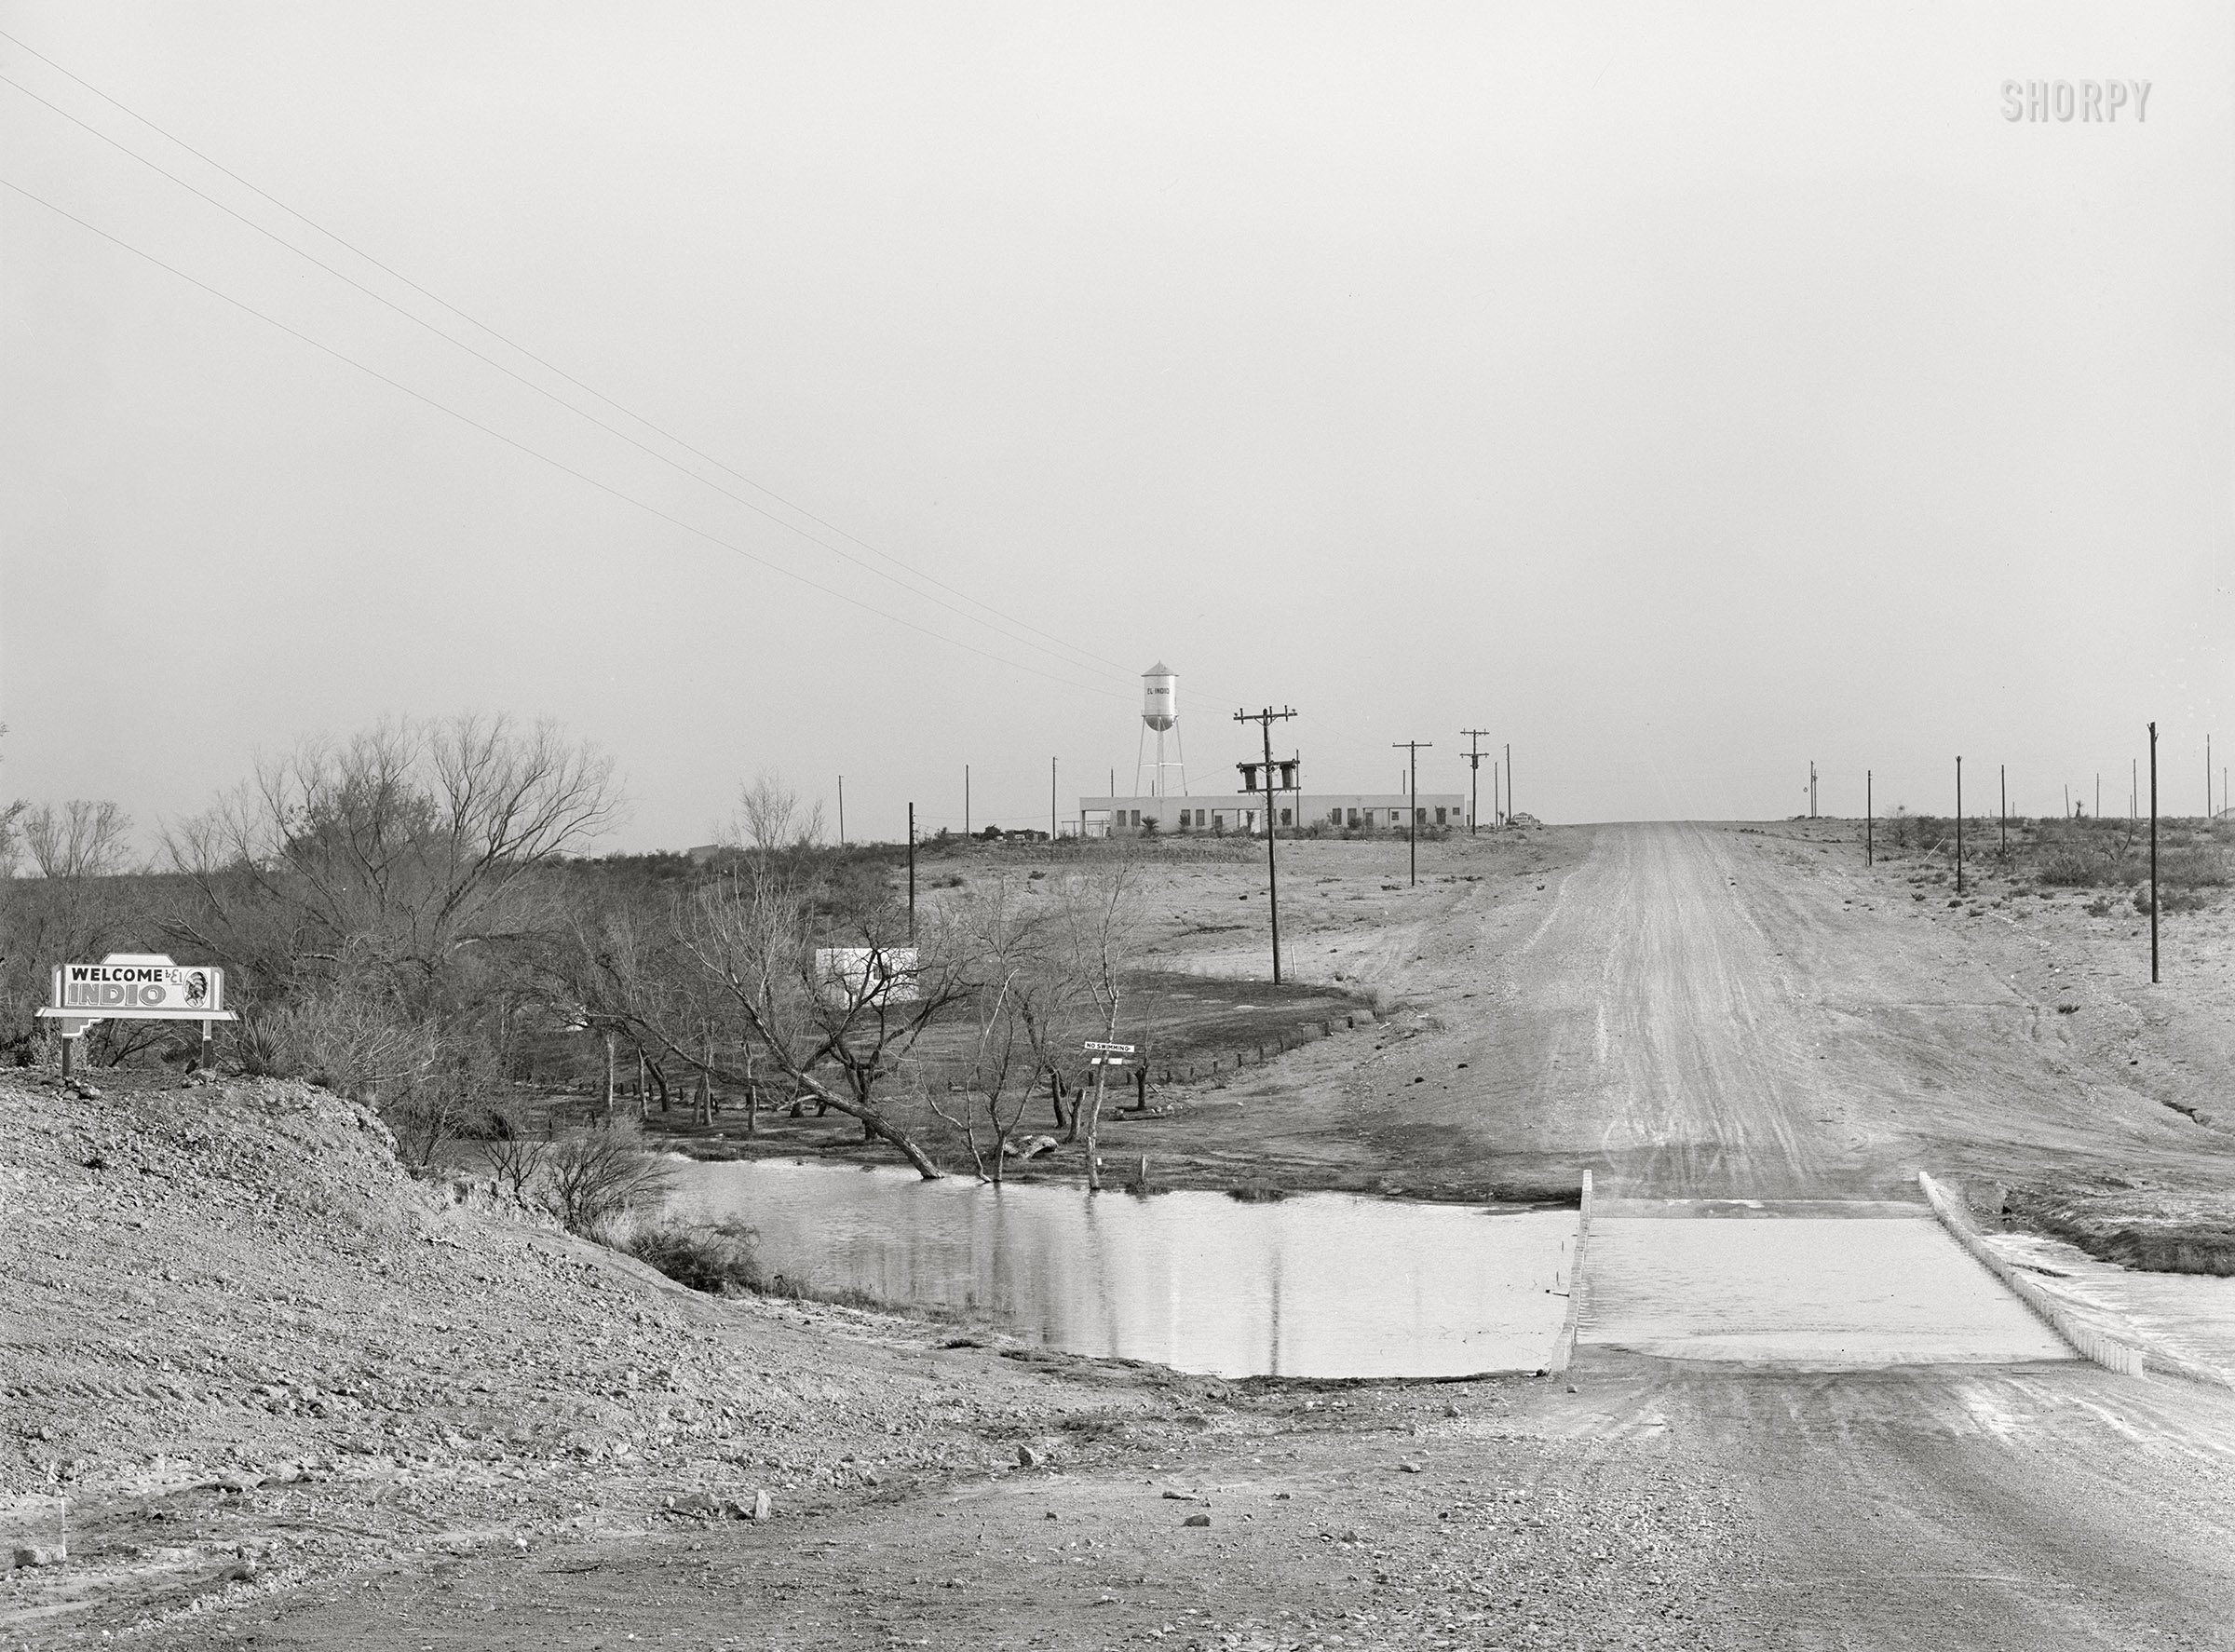 March 1939. "Approach to El Indio, Texas." Welcome, but NO SWIMMING. Medium format acetate negative by Russell Lee for the Farm Security Administration. View full size.